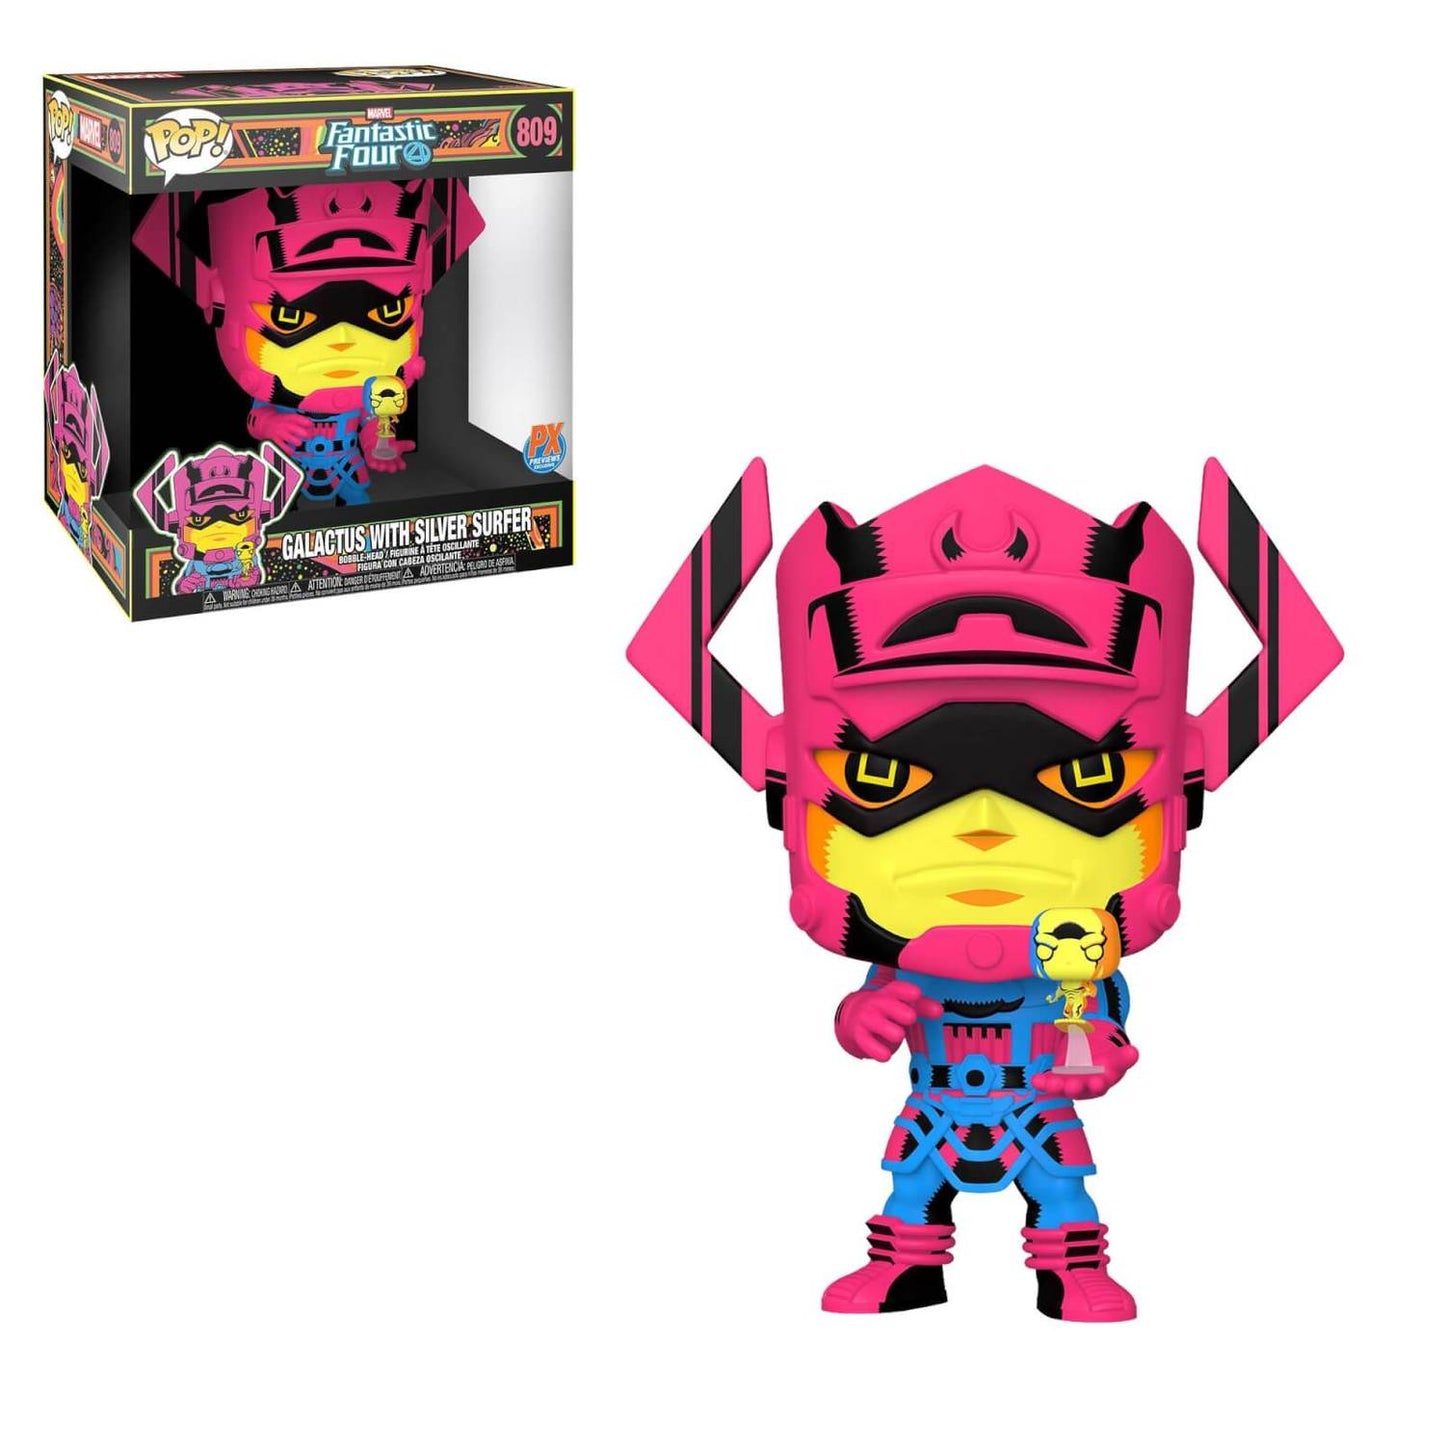 Galactus with Silver Surfer Blacklight Version (Marvel) 10" PX Exclusive Jumbo Funko Pop!